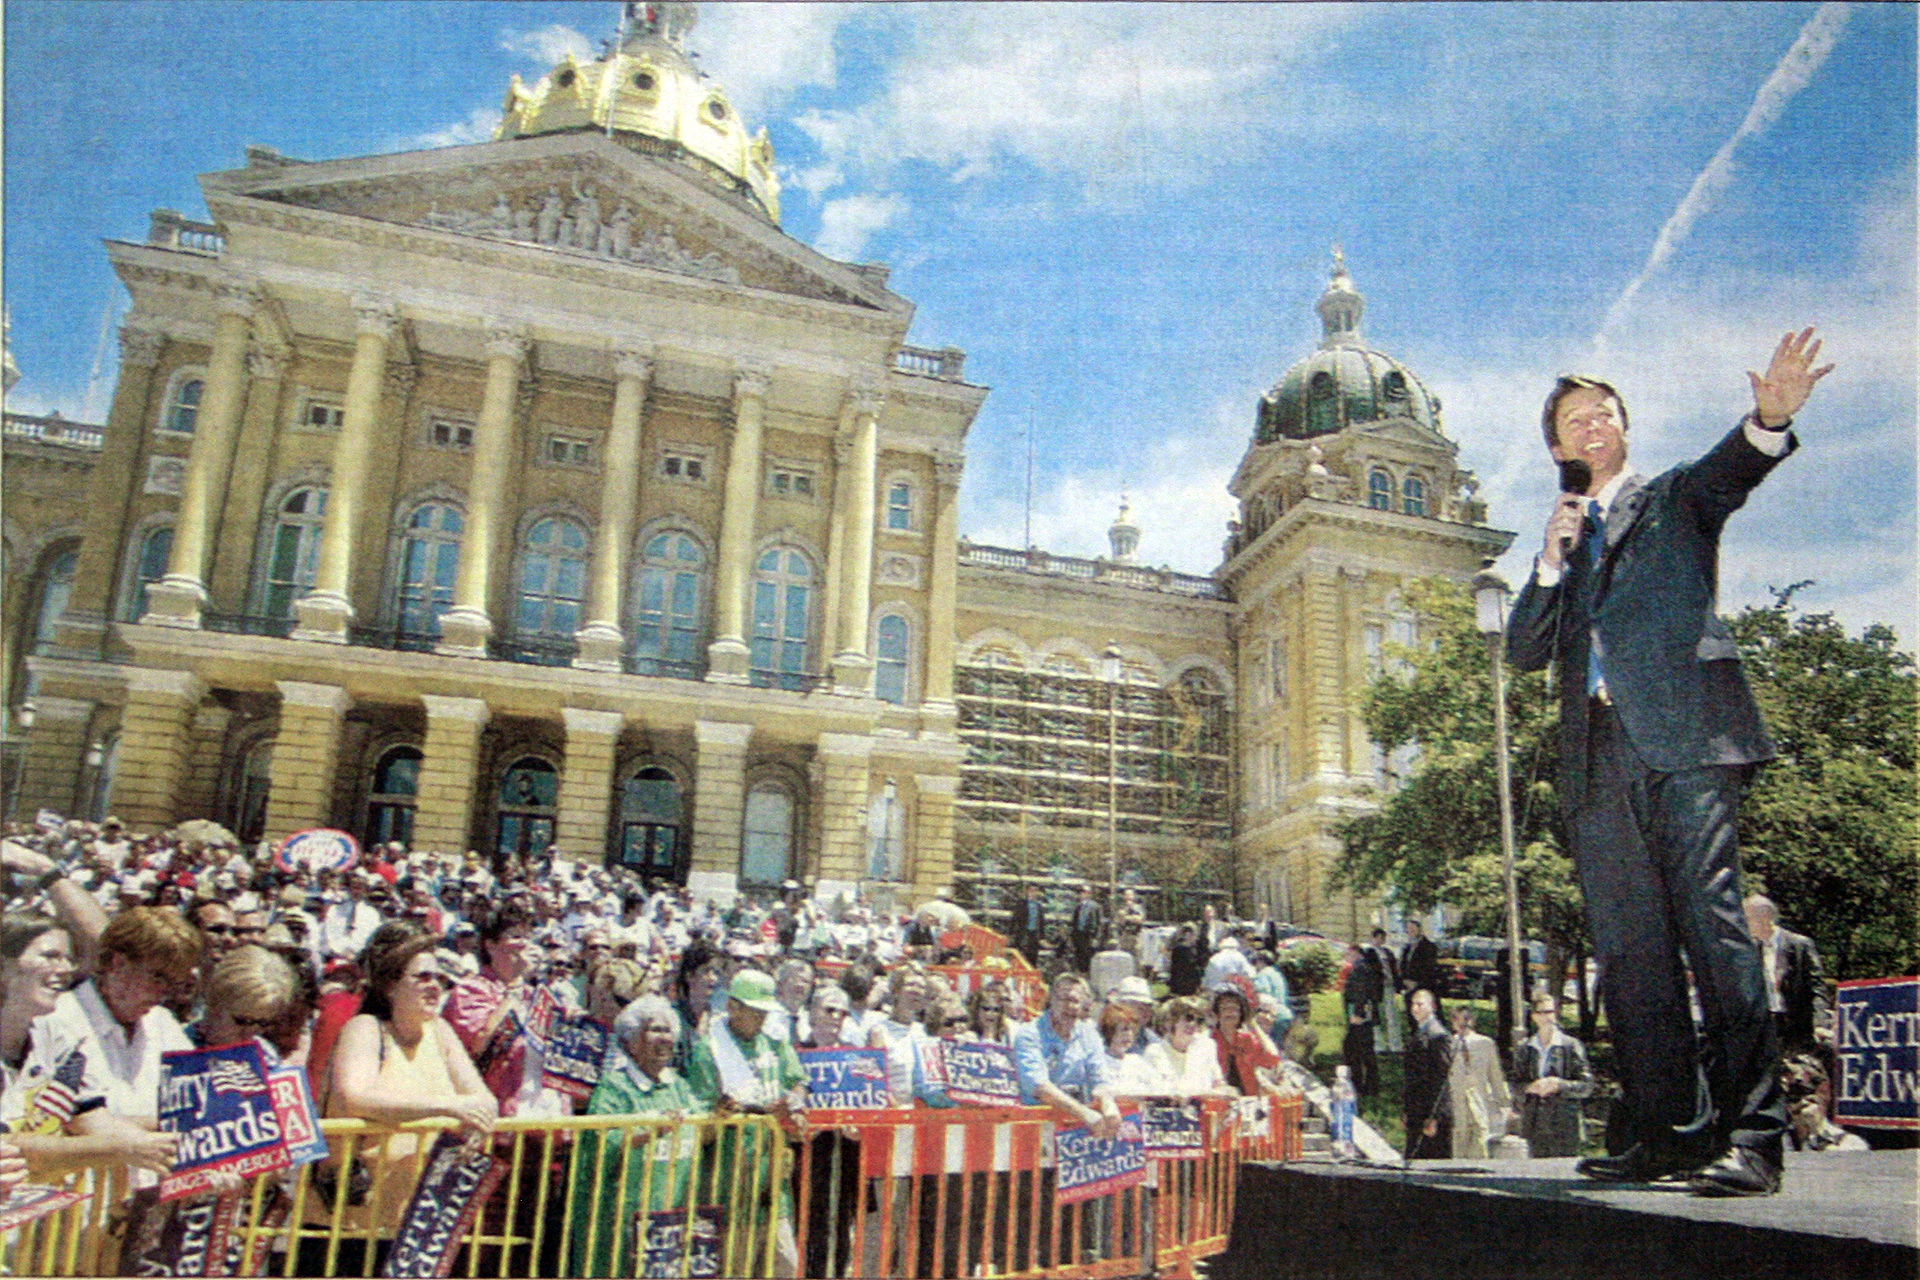 In July 2004 Senator John Edwards visits Des Moines, Iowa to thank Iowans during a political rally.